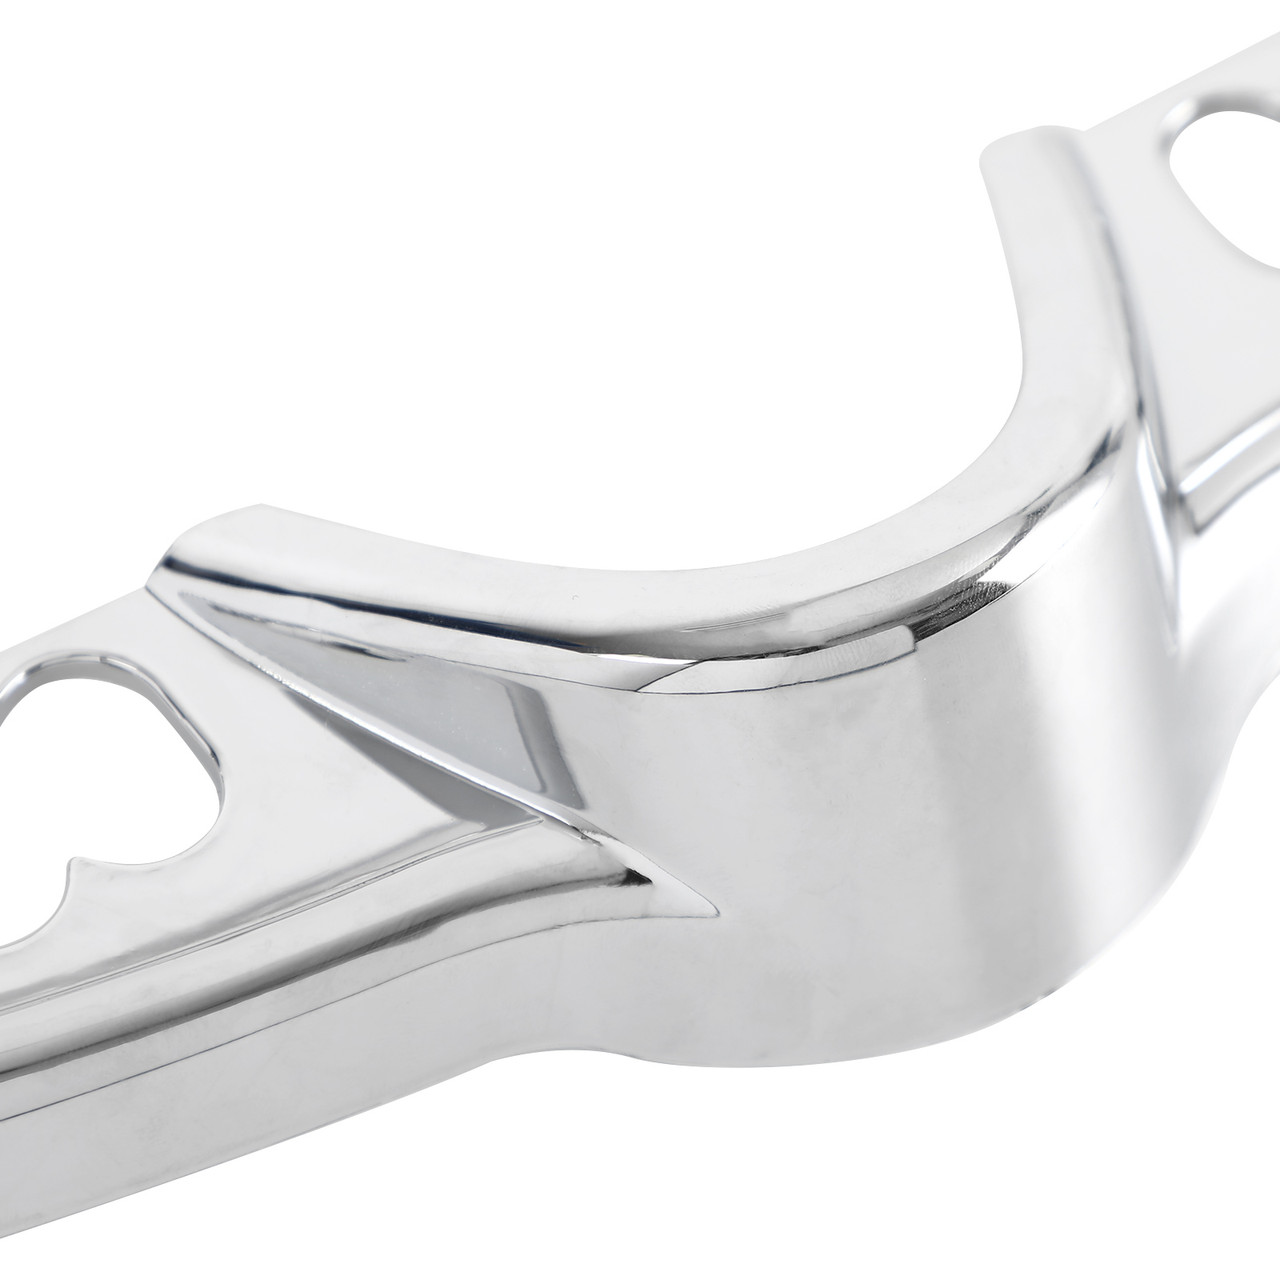 Switch Panel Accent Cover For Harley Touring 2014-2020 Electra Glides,Street Glide,Tri Glides. Chrome